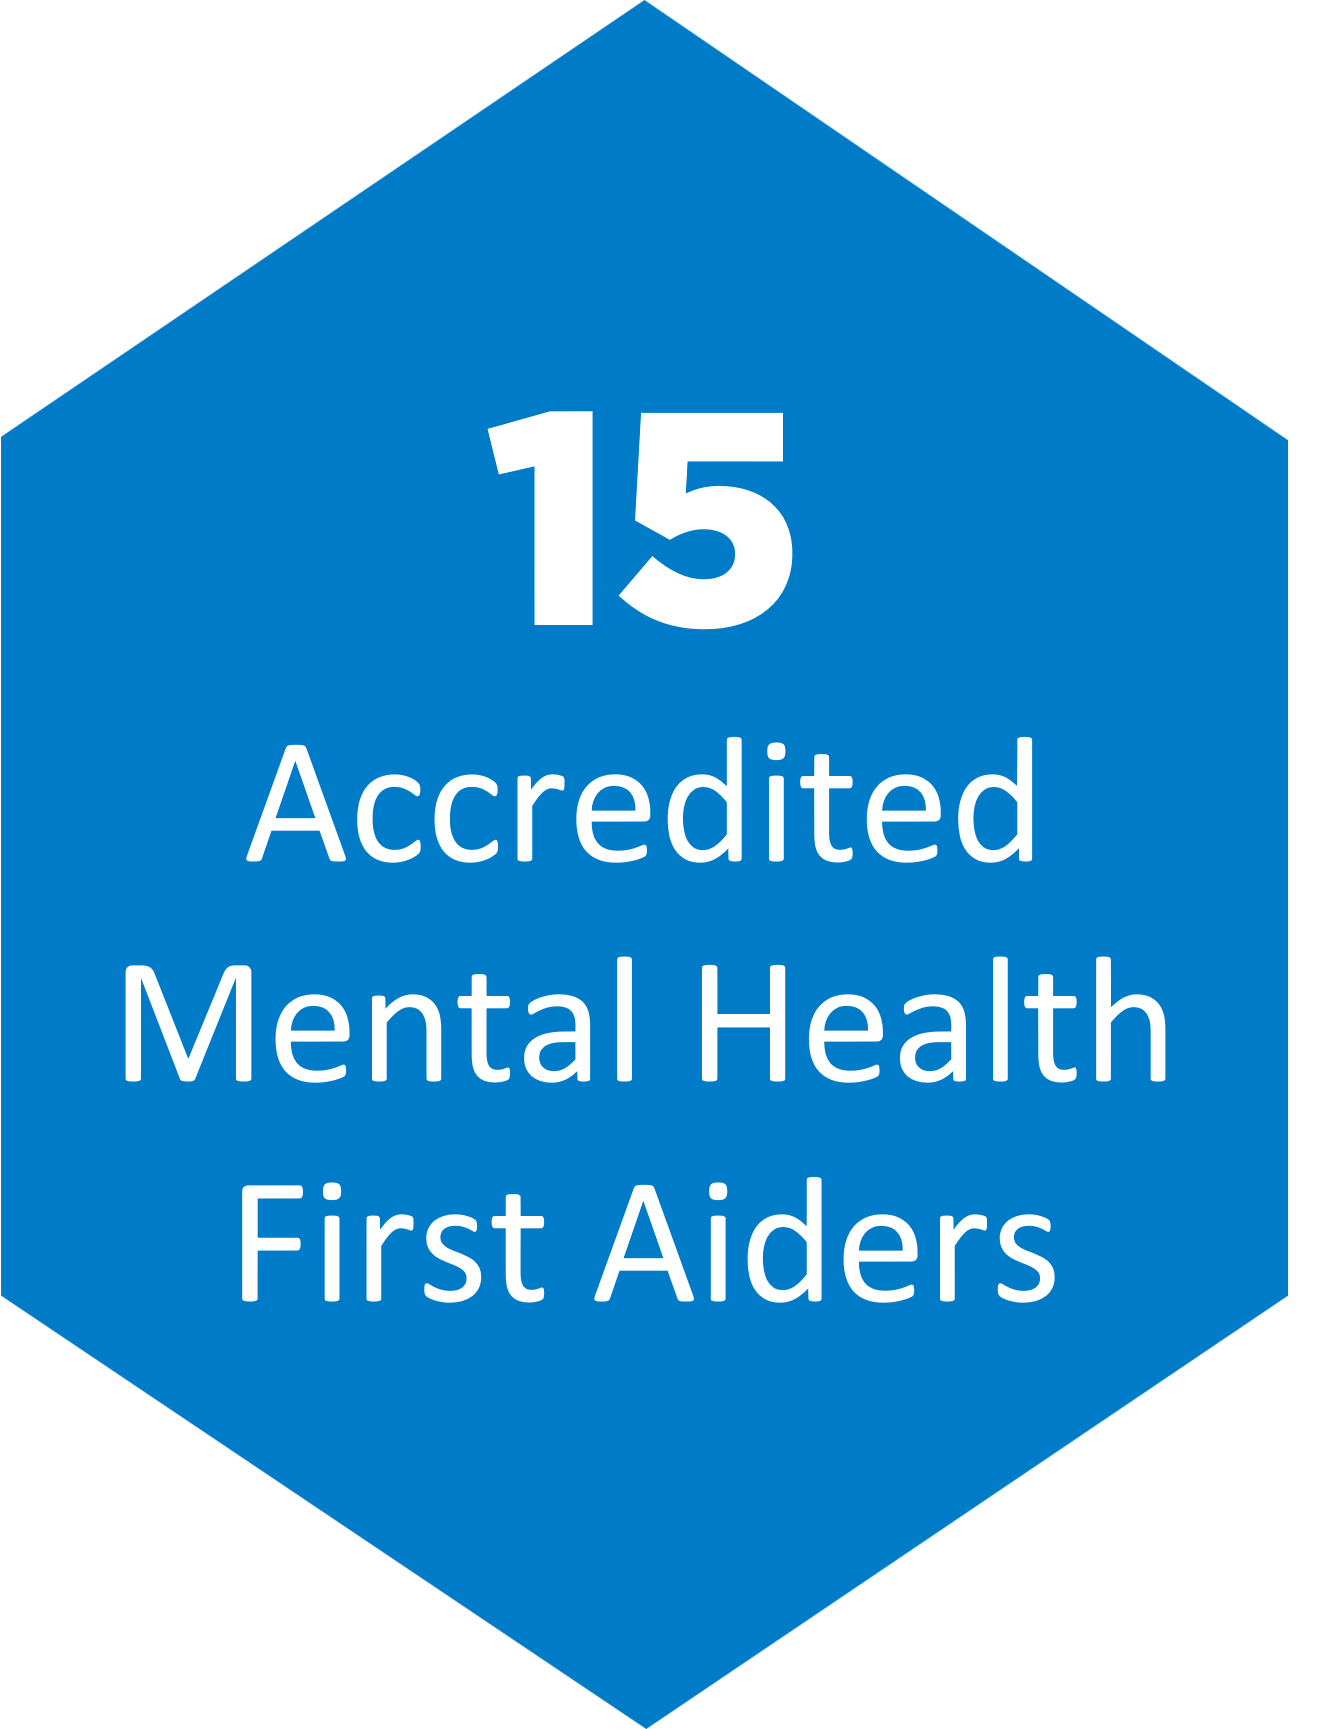 A blue hexagon with white text within it reading '15 Accredited Mental Health First Aiders'.